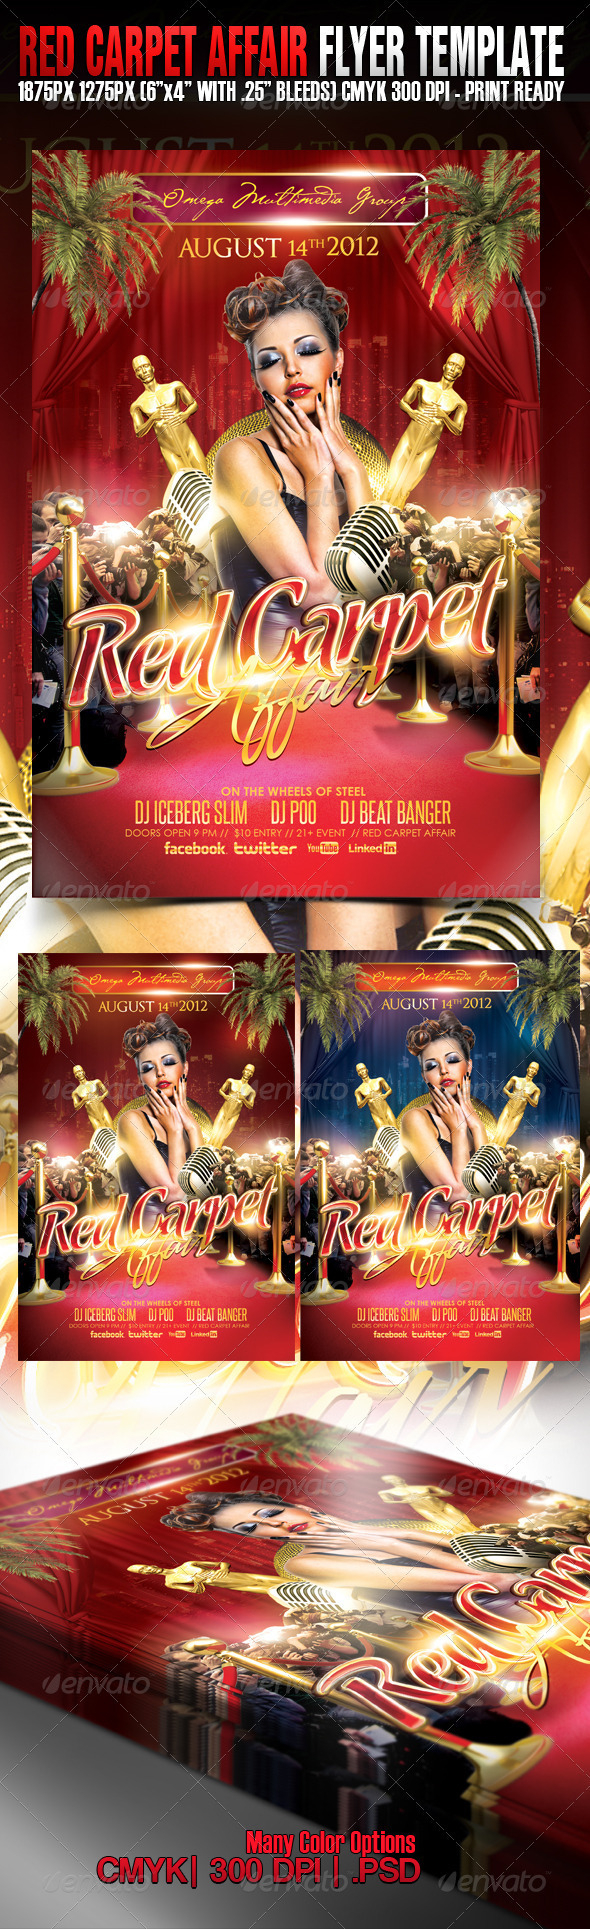 Red Carpet Flyer Collection #10  Louis Twelve In Red Carpet Event Flyer Template Regarding Red Carpet Event Flyer Template